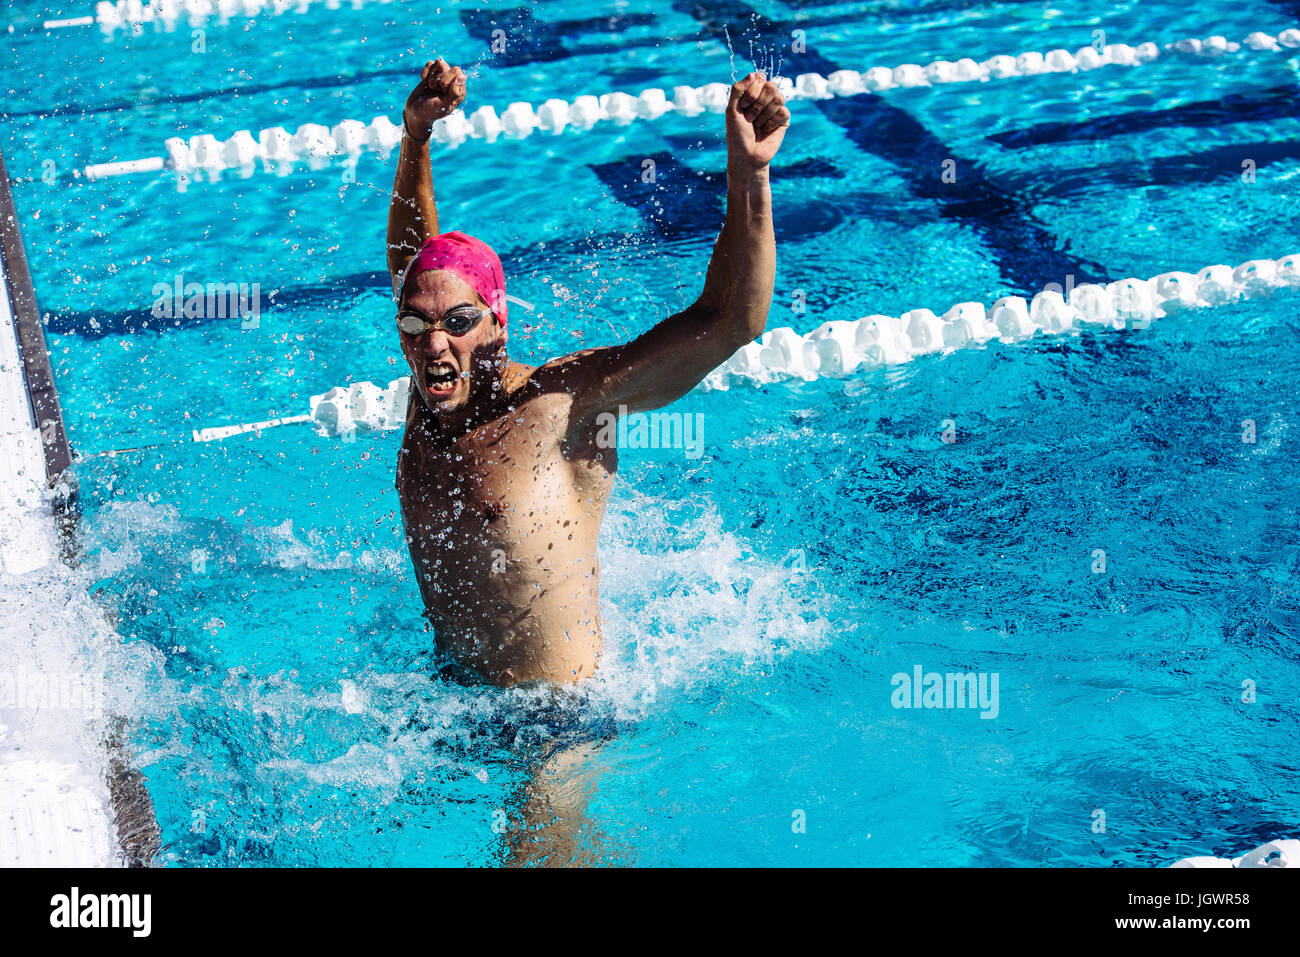 Swimmer in water in pool gesturing triumph Stock Photo